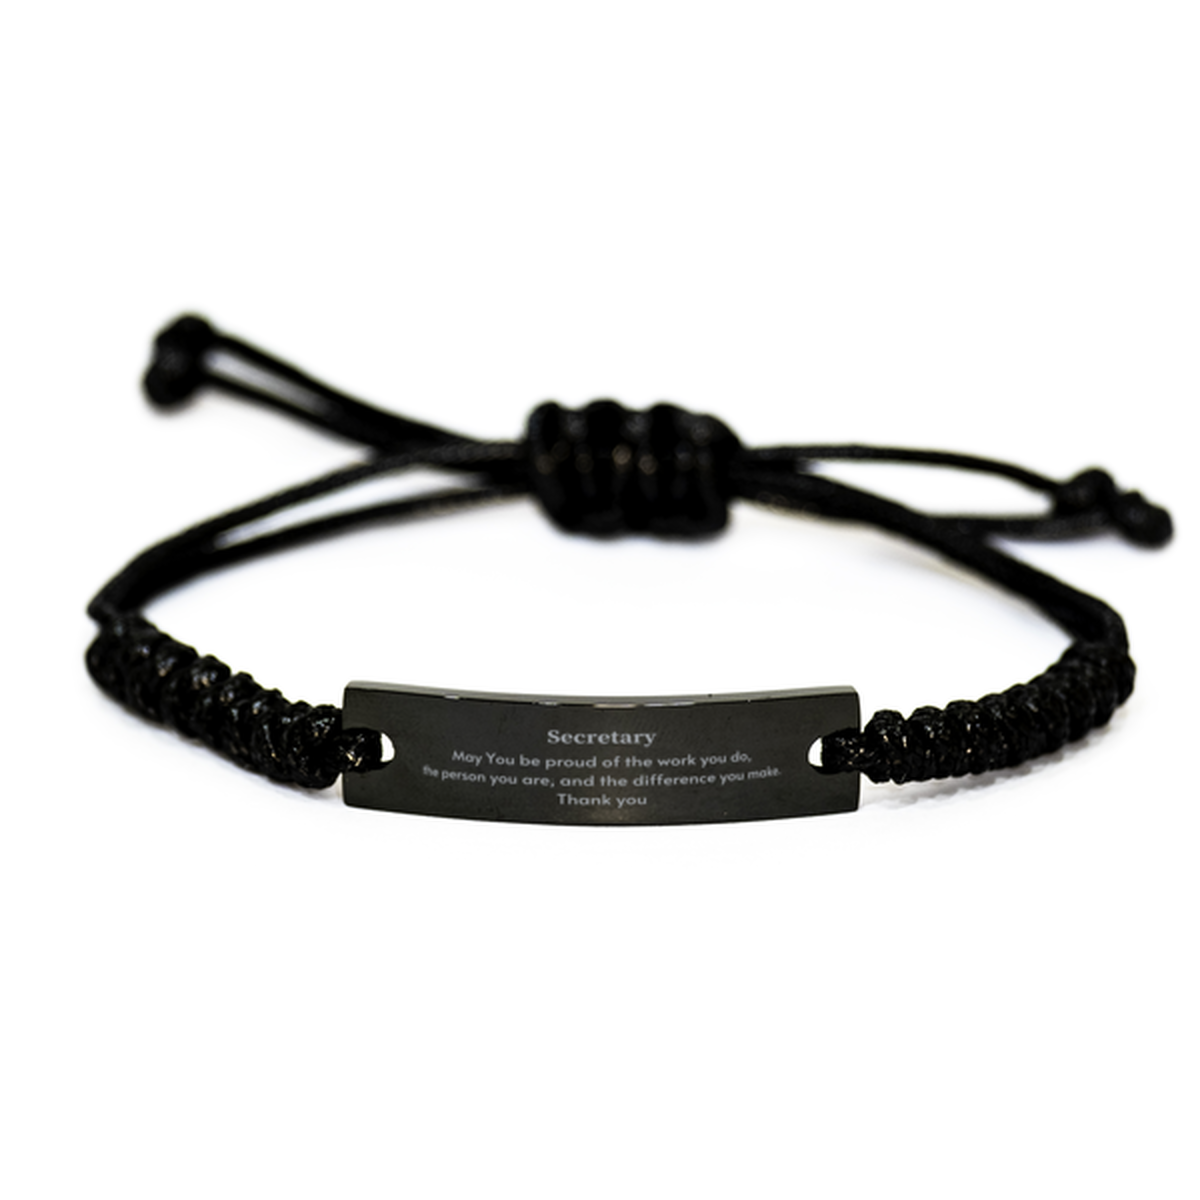 Heartwarming Black Rope Bracelet Retirement Coworkers Gifts for Secretary, Secretary May You be proud of the work you do, the person you are Gifts for Boss Men Women Friends